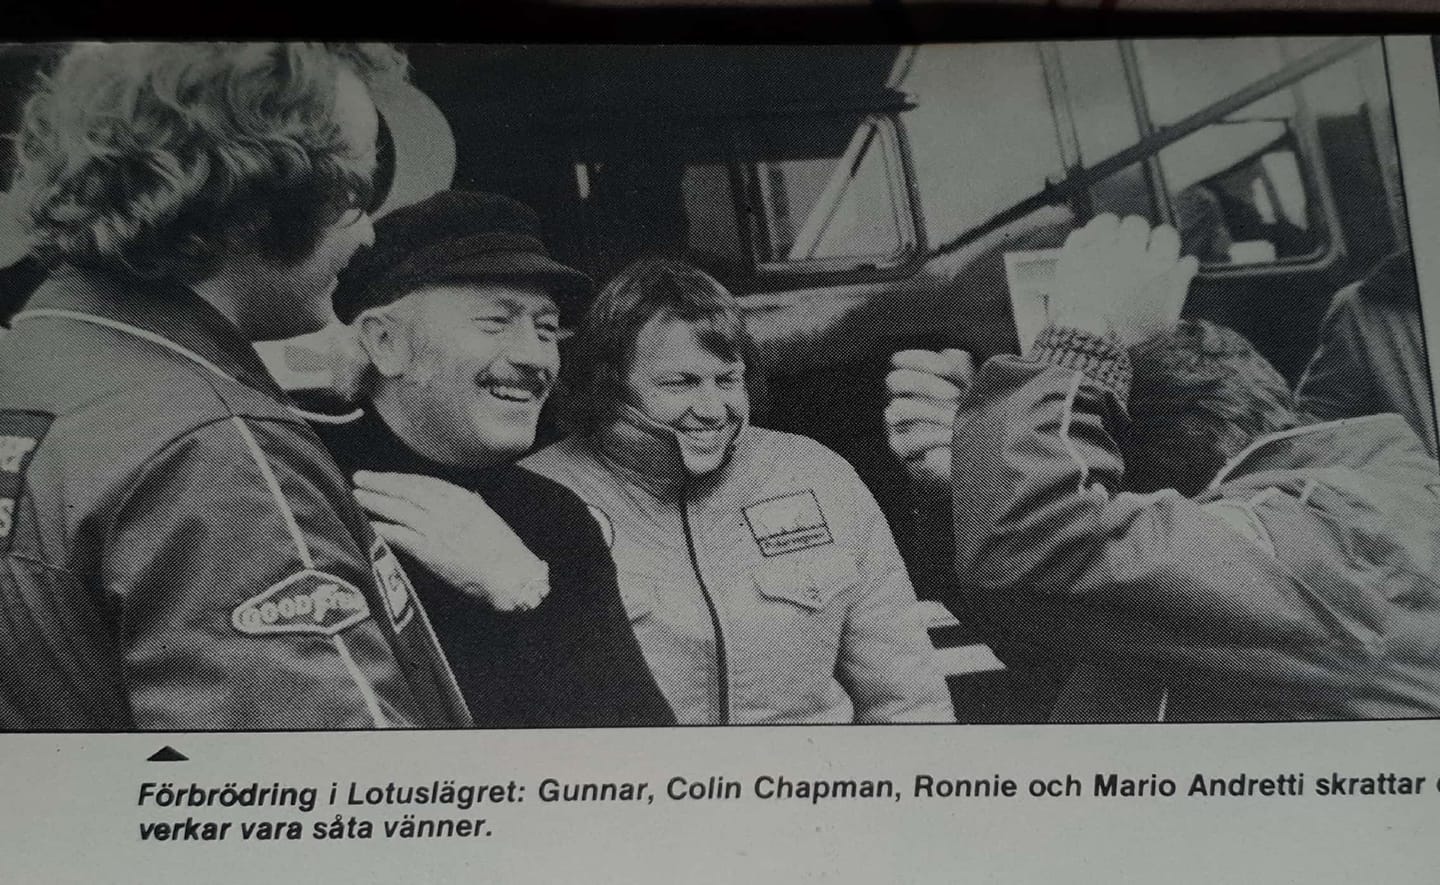 Gunnar Nilsson, Colin Chapman, Ronnie Peterson and Mario Andretti at the Swedish Grand Prix in Anderstorp on 13 June 1976.